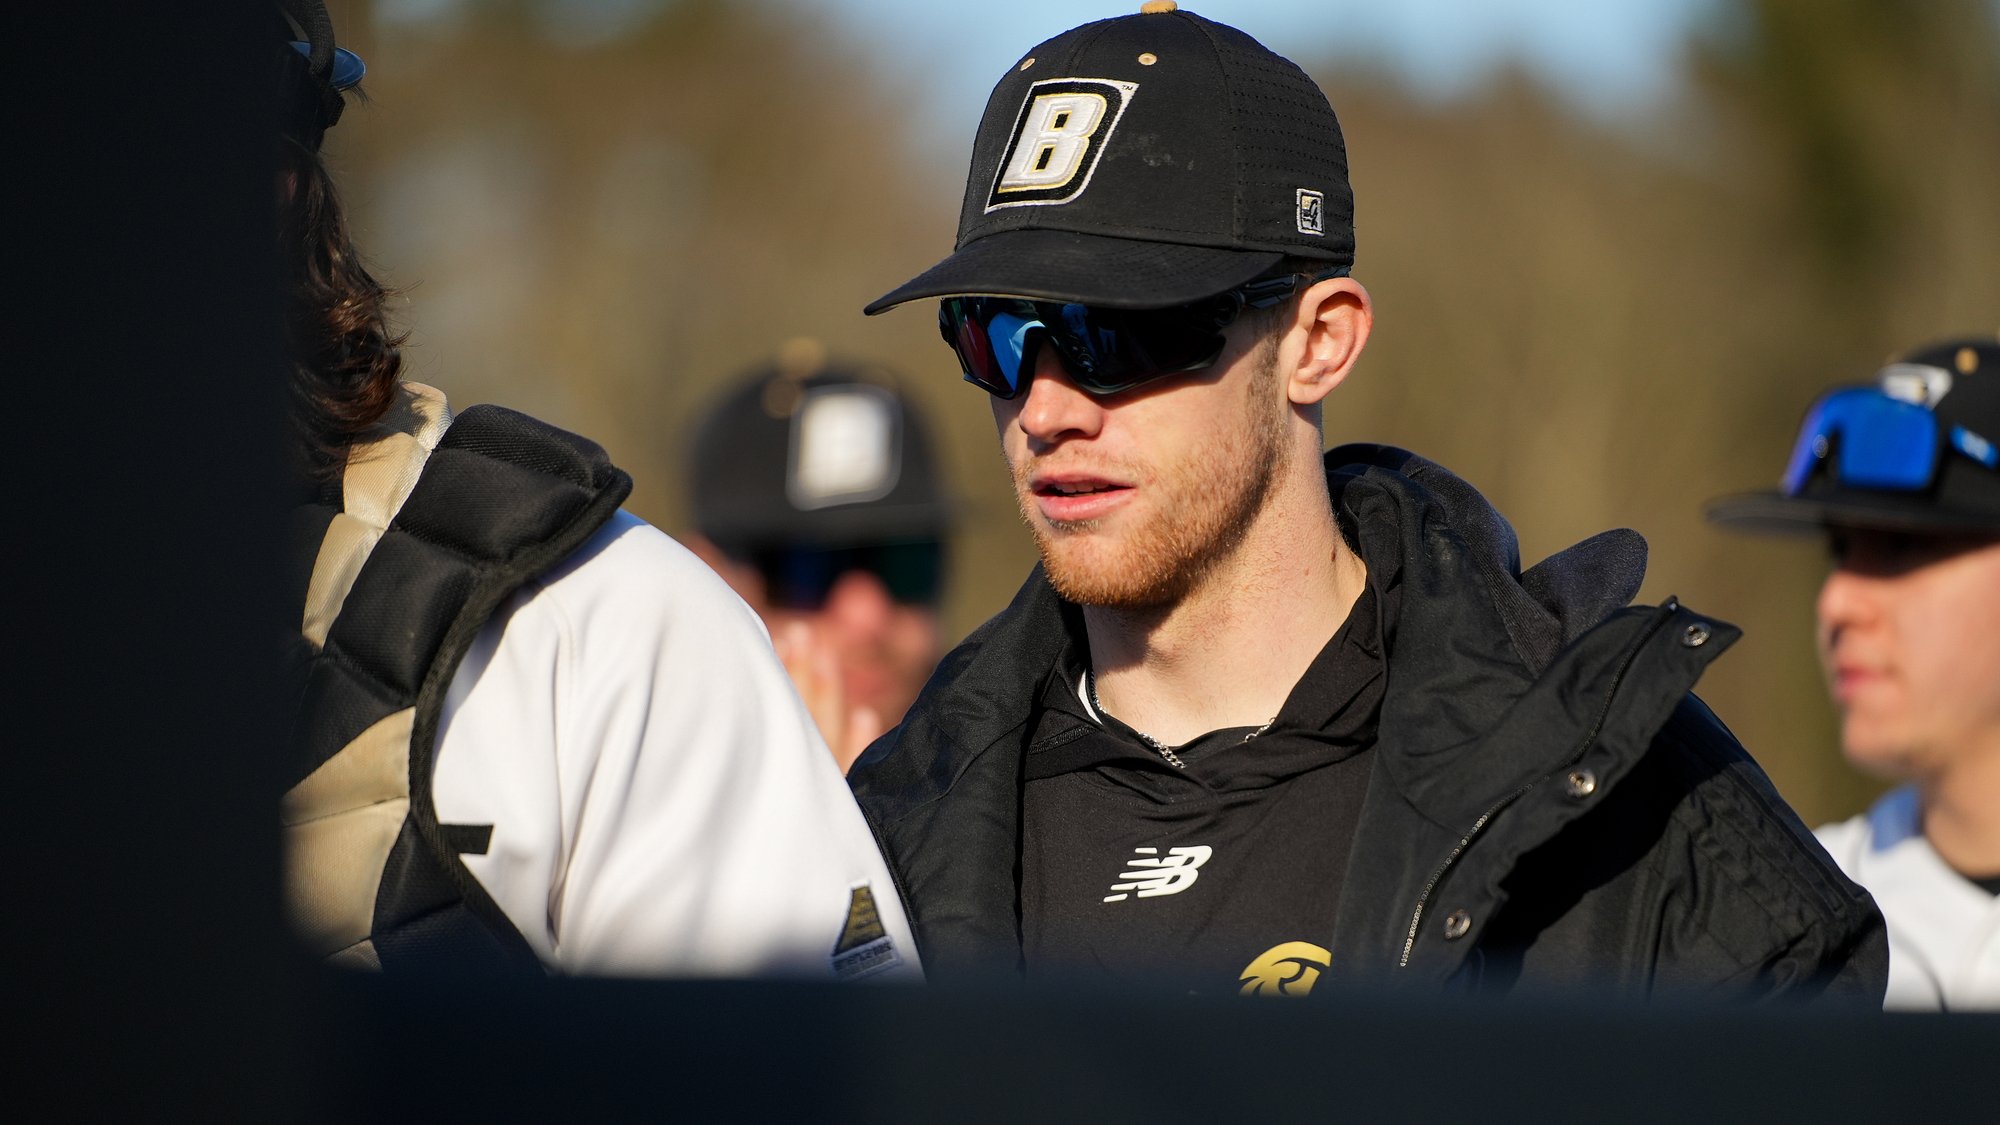 Bryant clinches series over Binghamton with 10-2 victory on Saturday